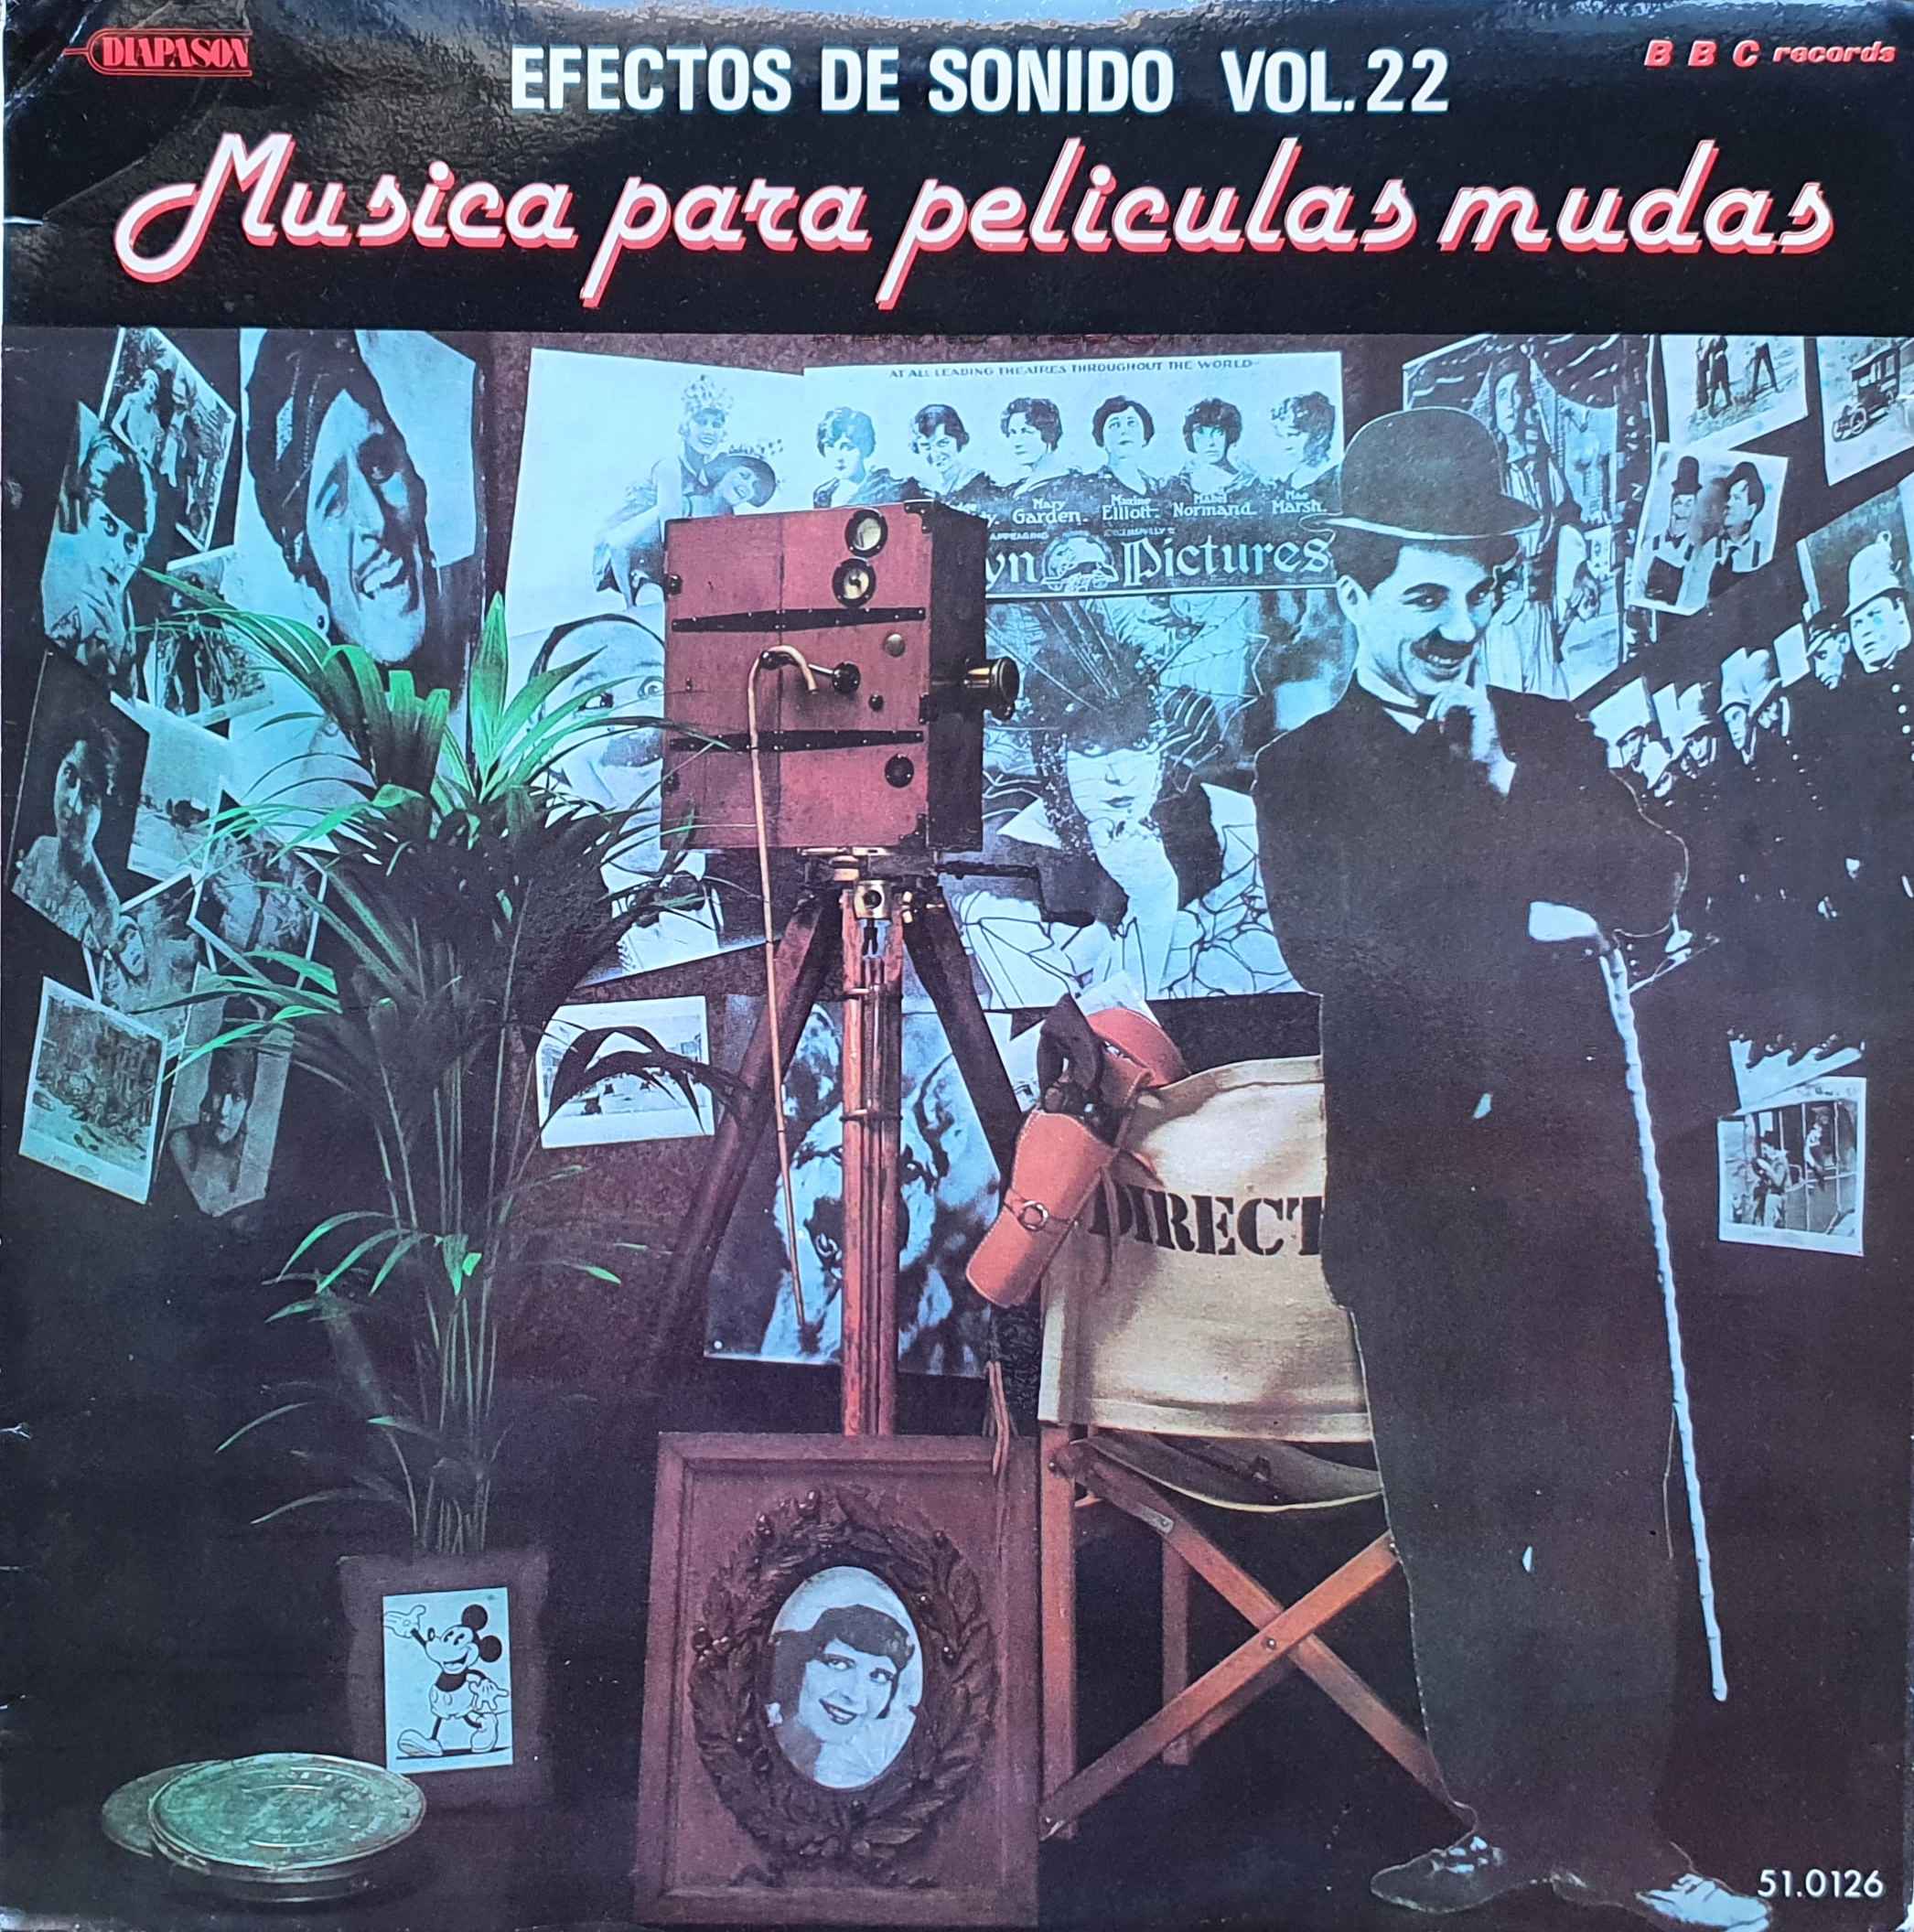 Picture of 51.0126 Efectos de sonido - Musica Para Peliculas Mudas by artist Various from the BBC albums - Records and Tapes library